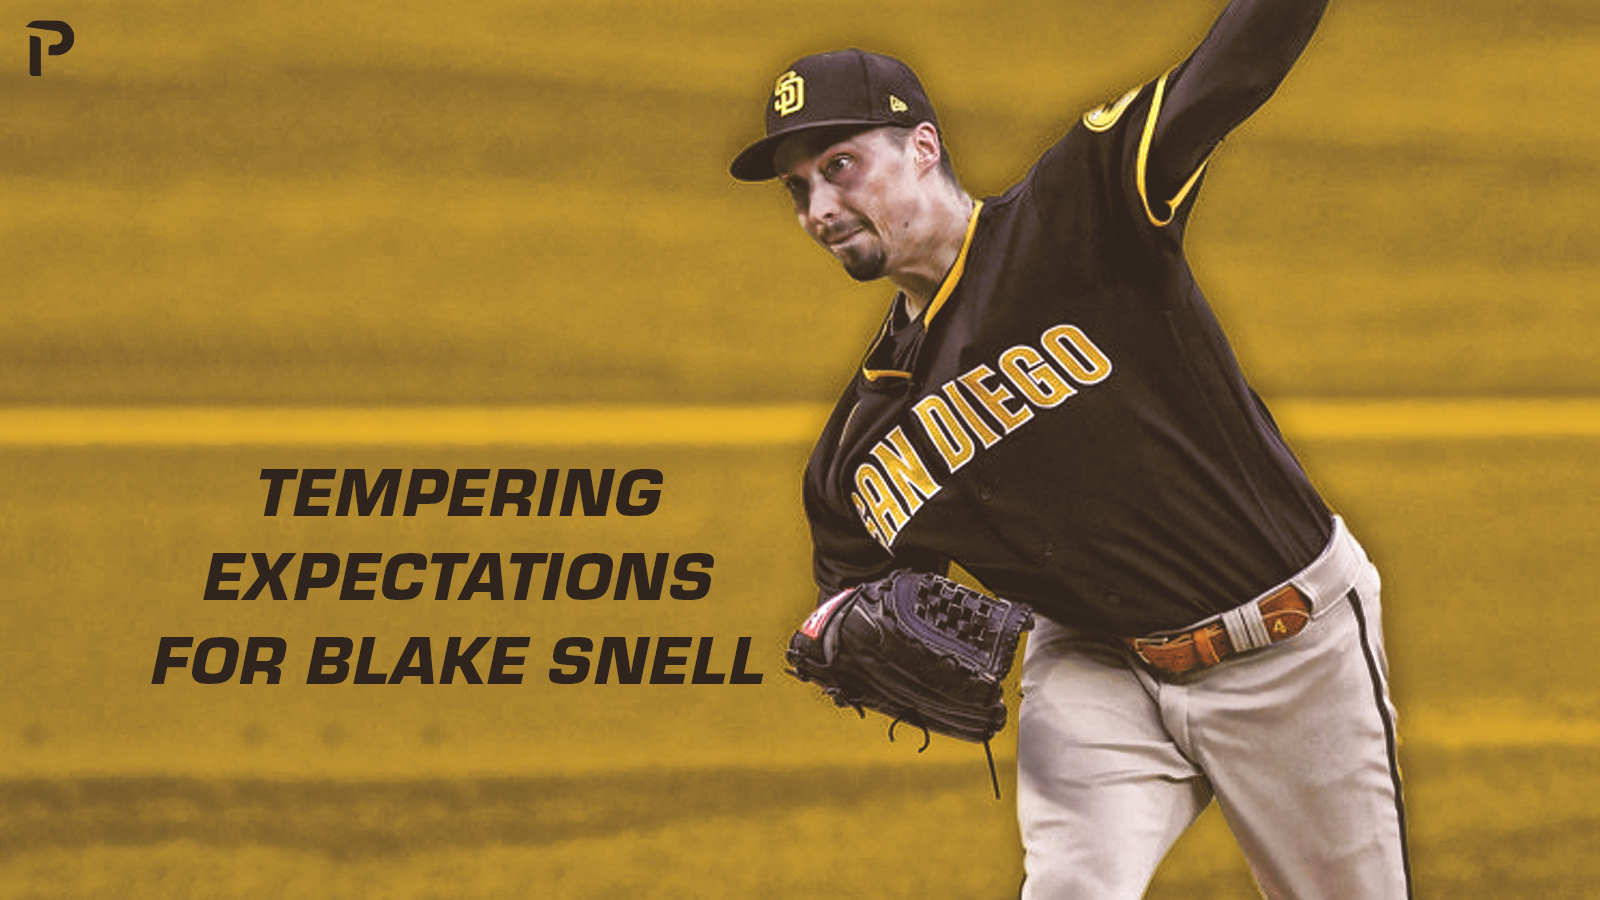 Tempering Expectations for Blake Snell